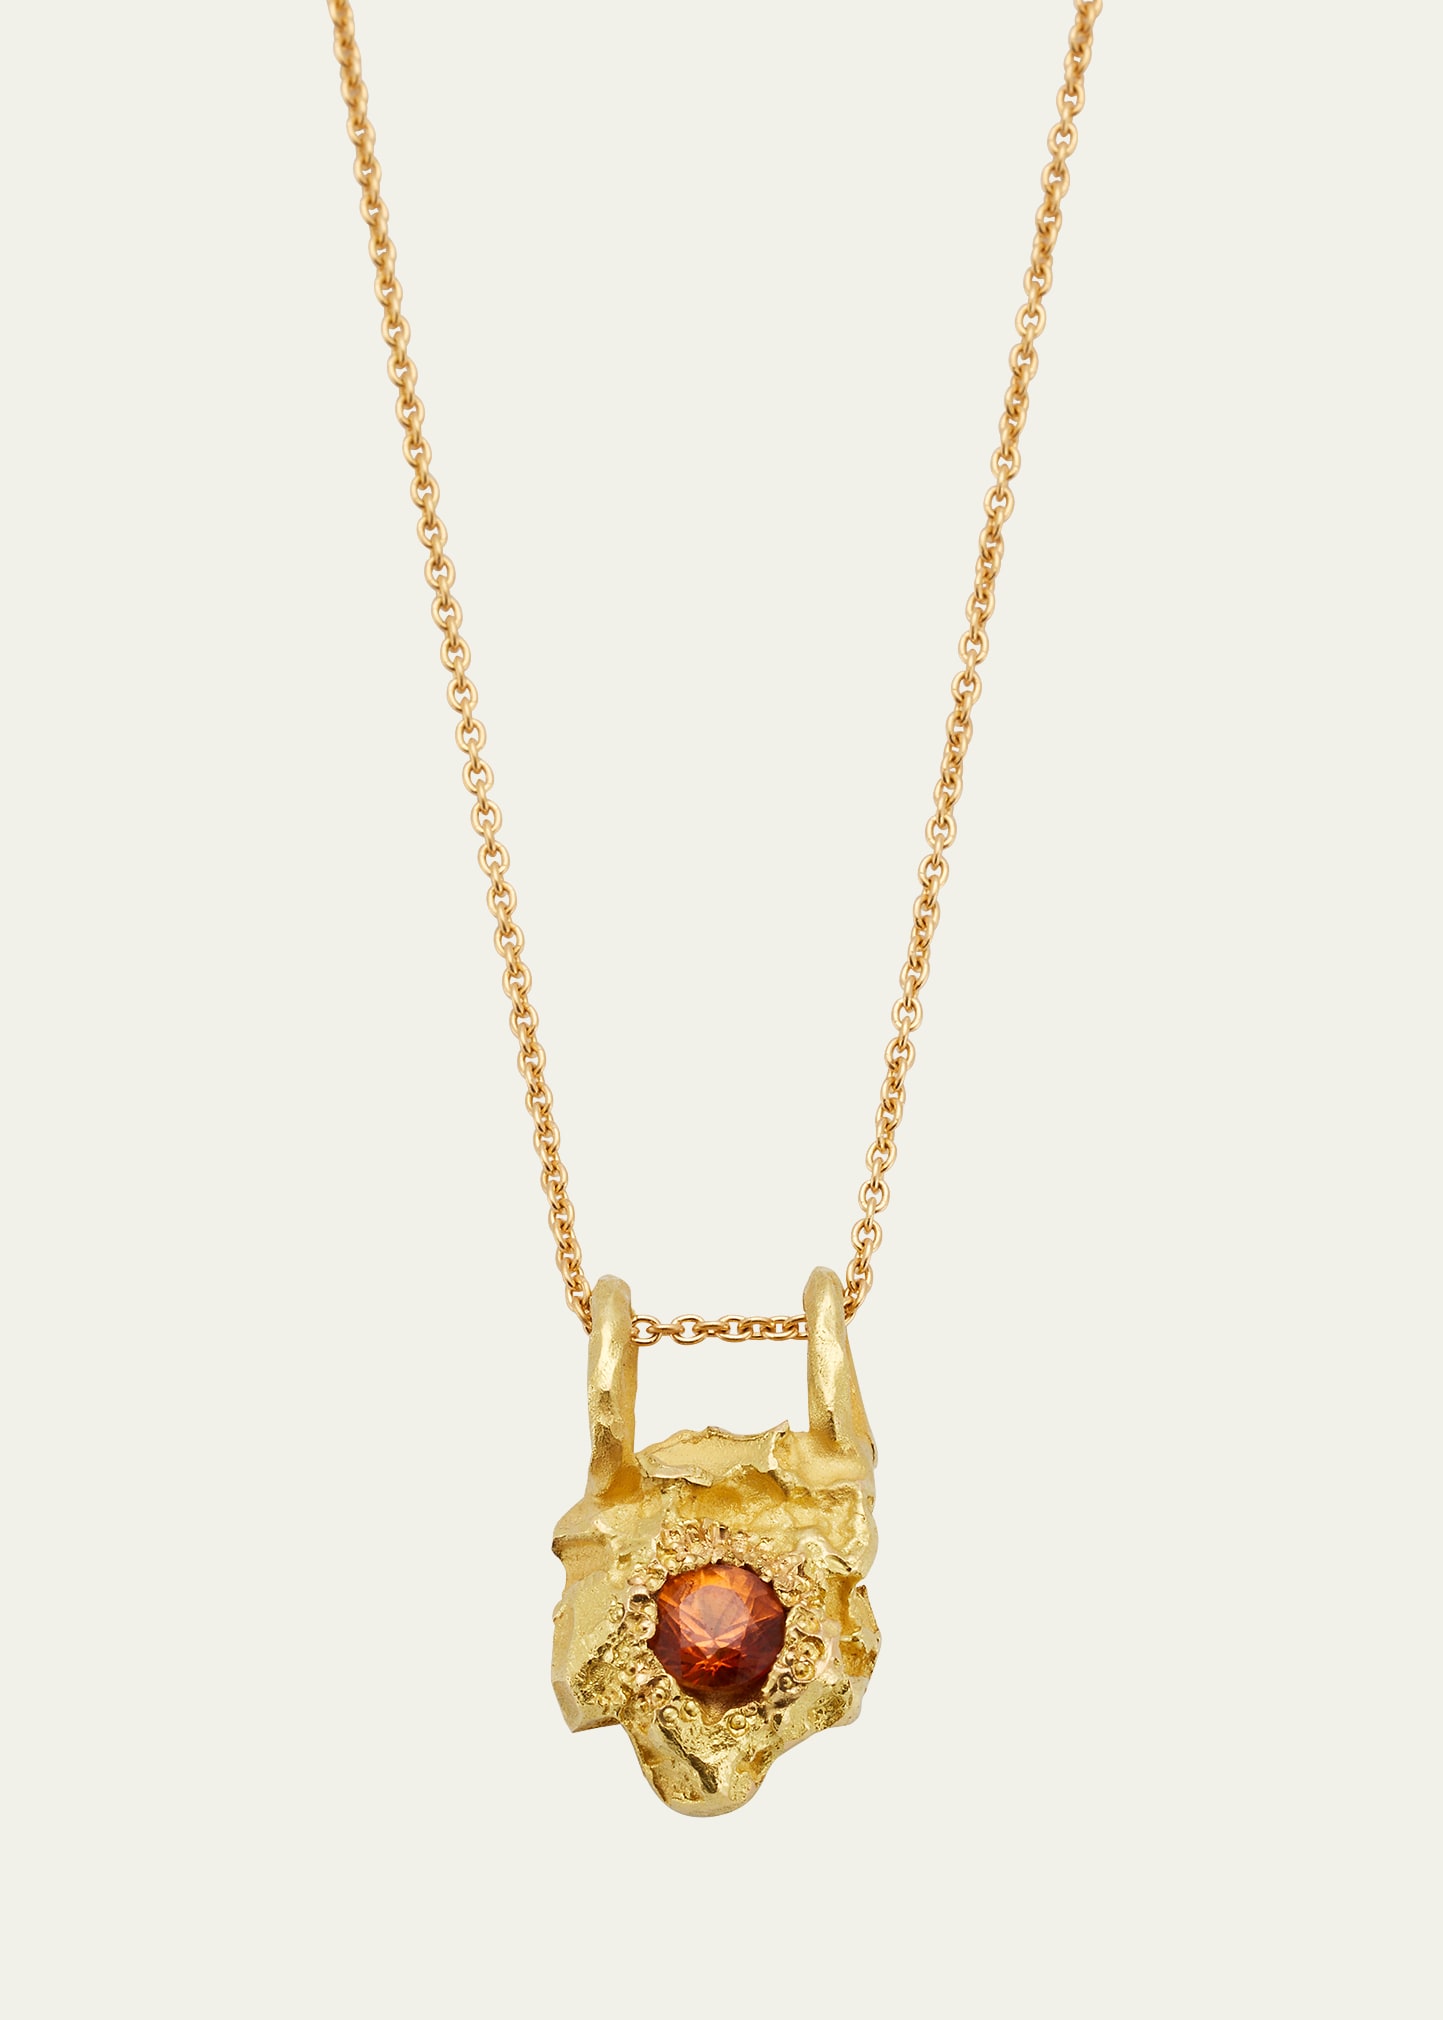 Elhanati Smaller Rock Necklace in 18K Solid Yellow Gold with 3.75mm Orange Sapphire